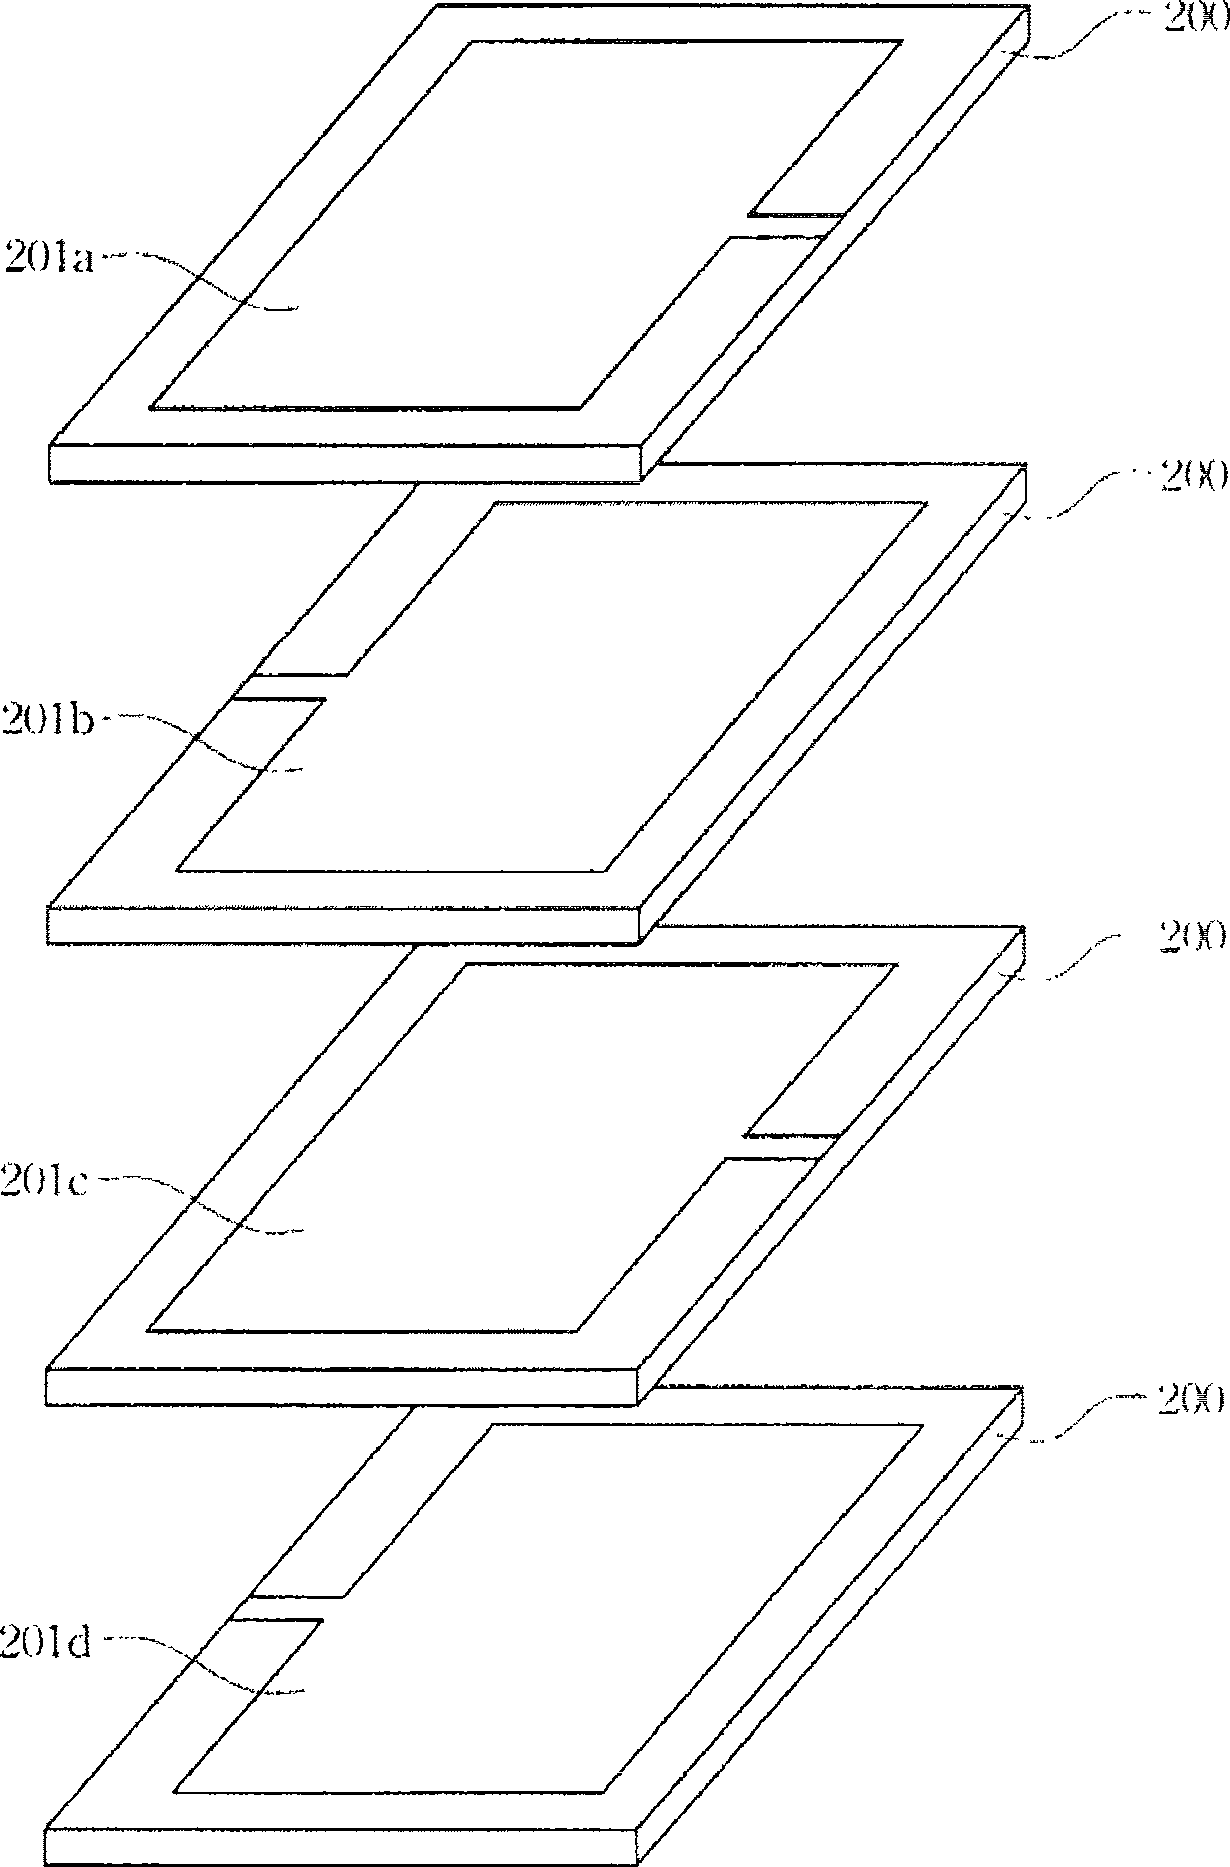 Base plate with buried passive element and its producing method